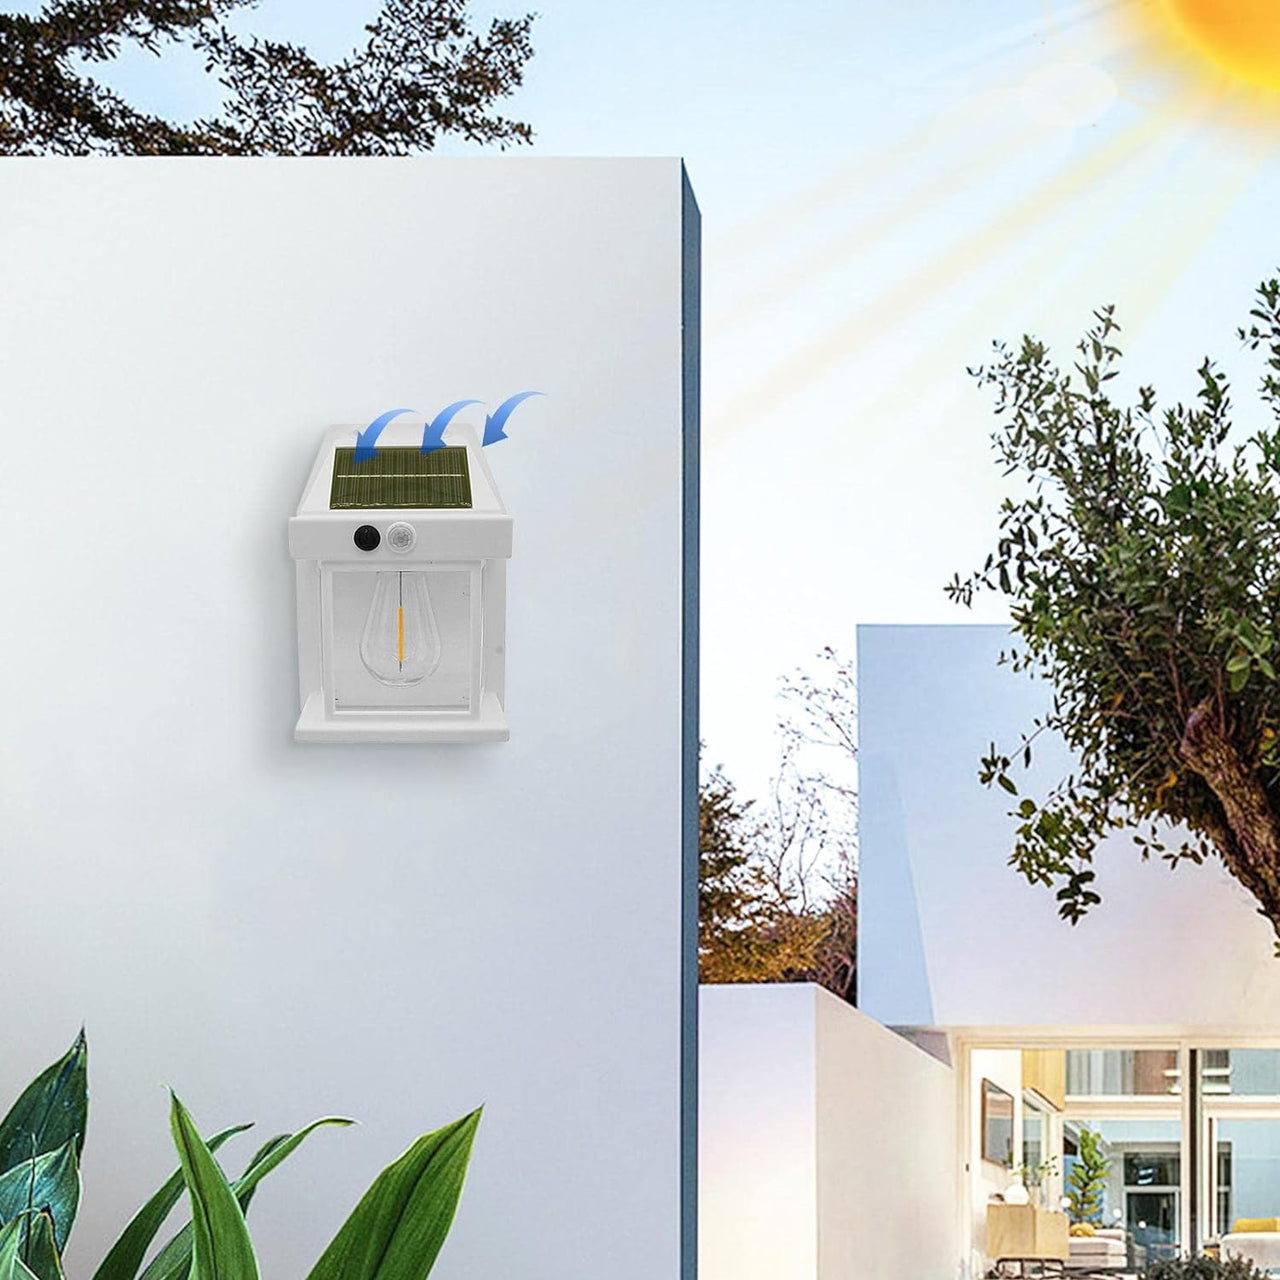 Wall Mounted Solar Light with Motion Sensor